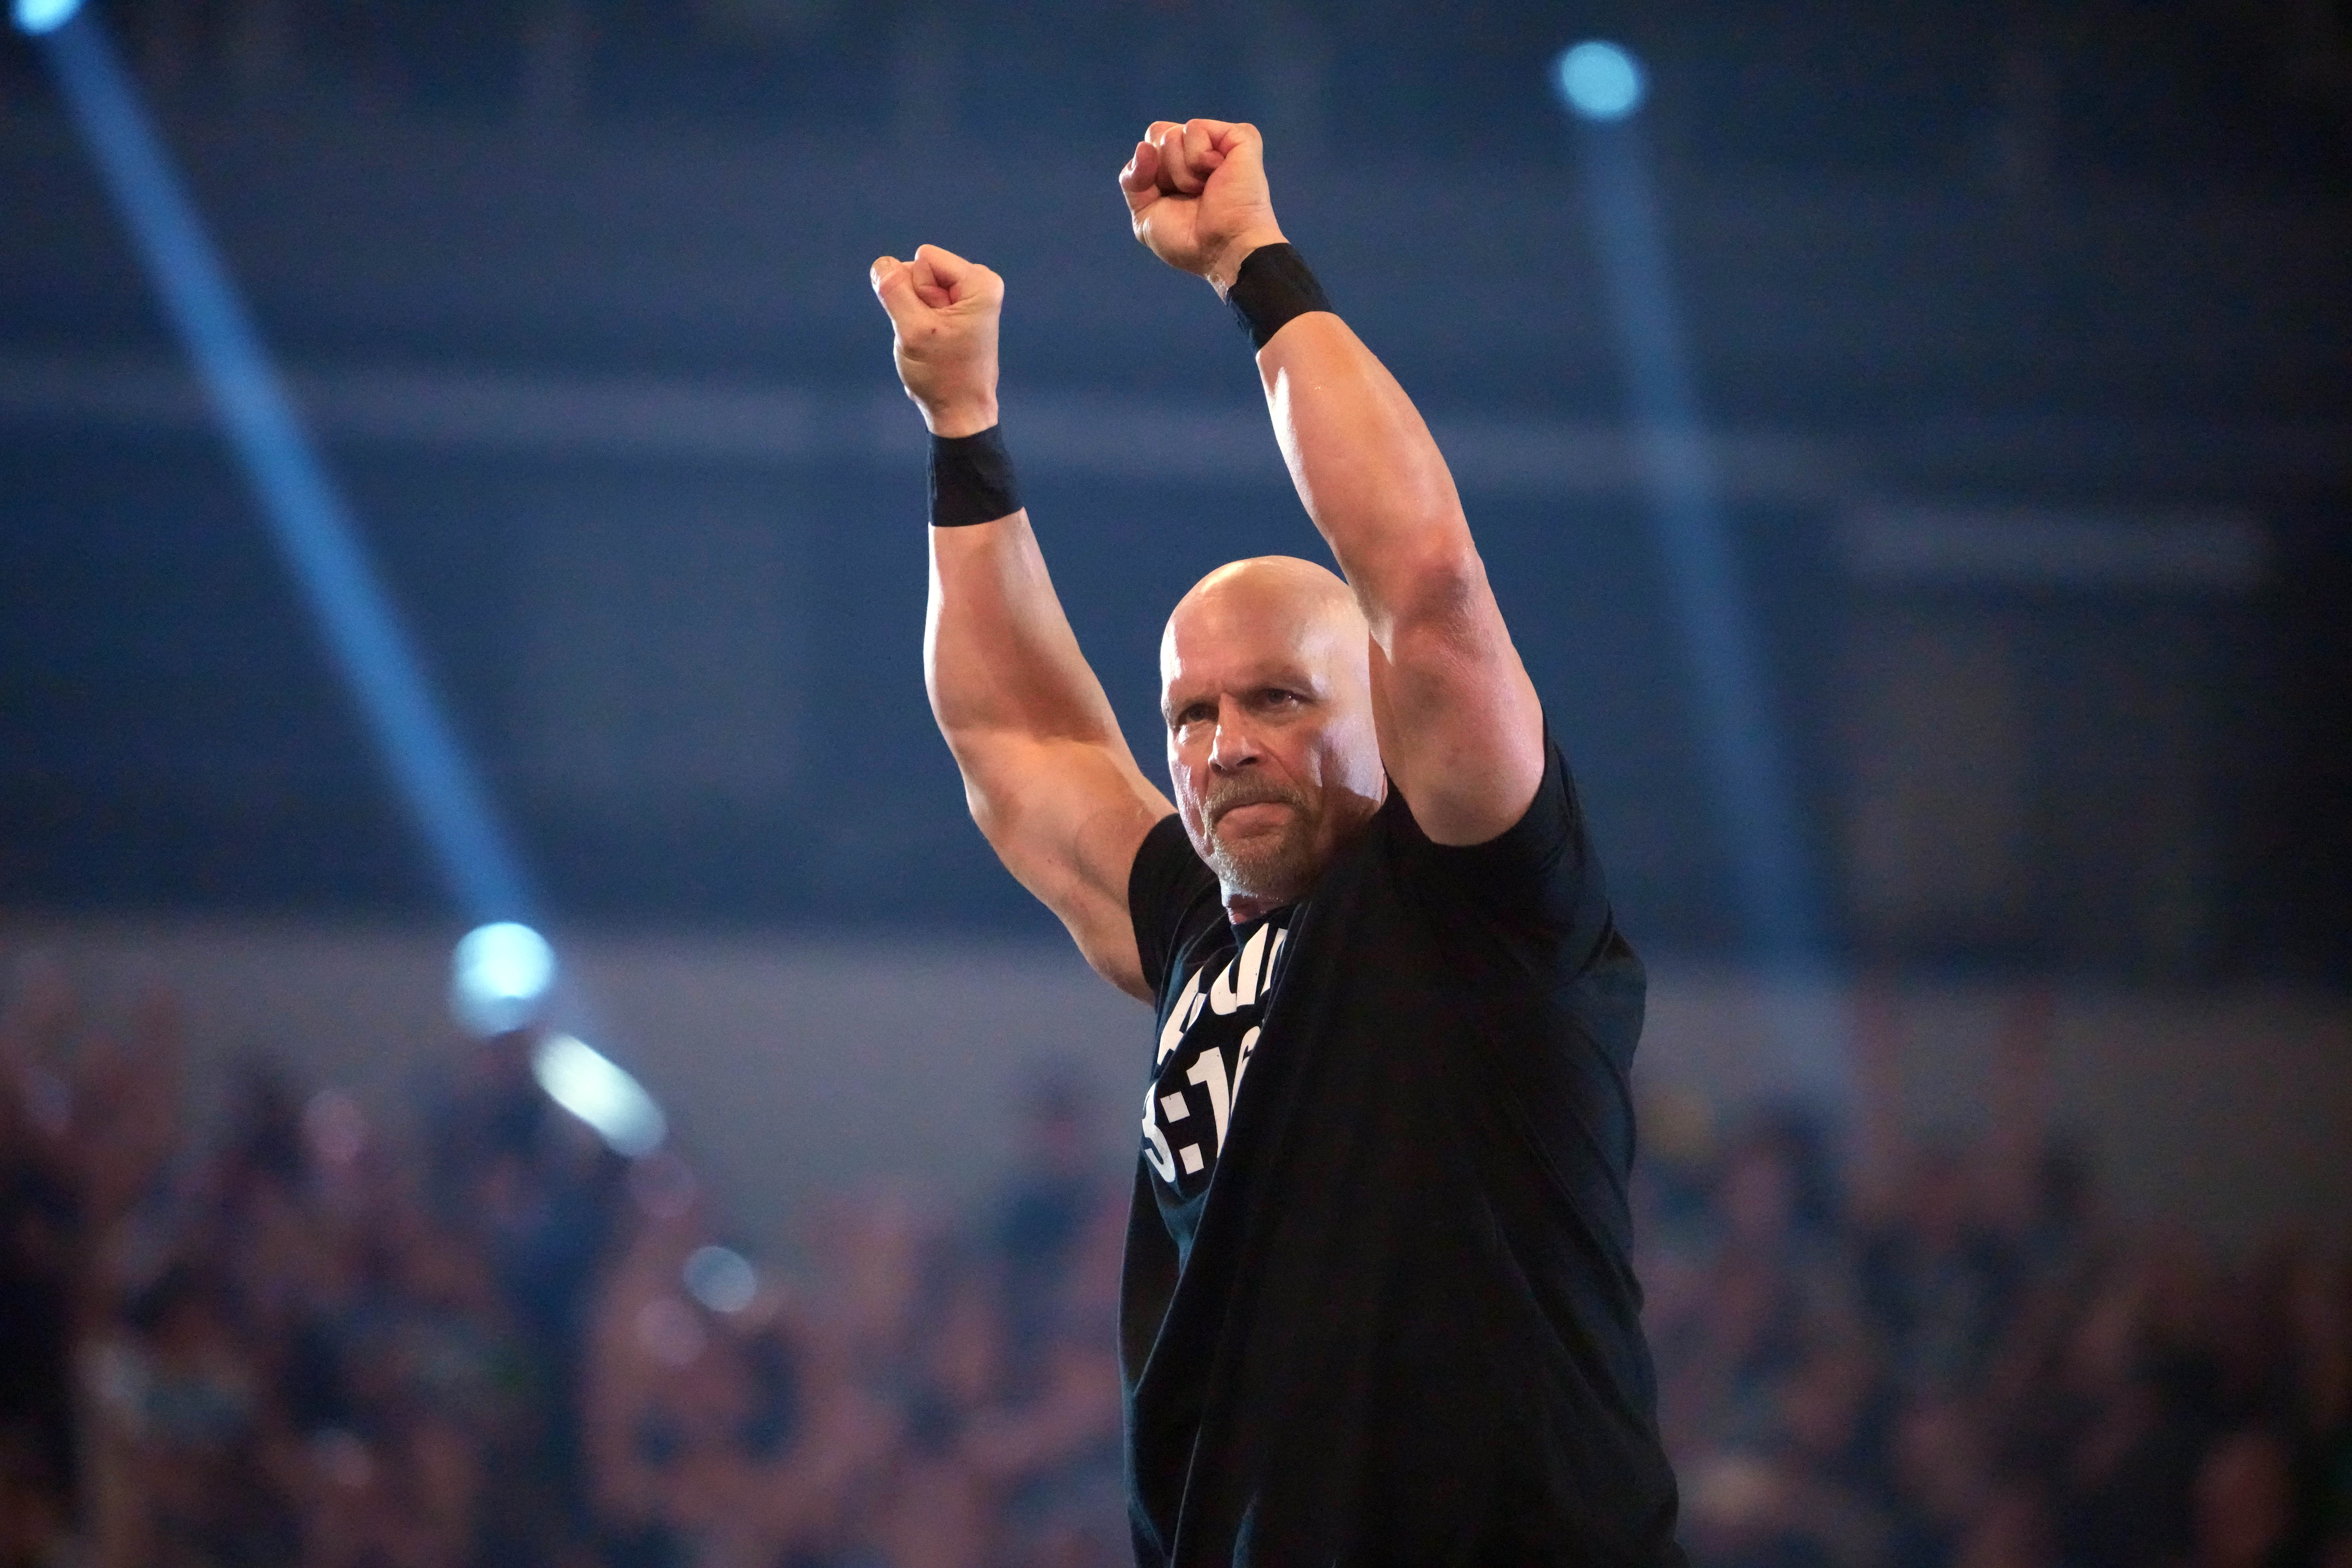 Steve Austin had WrestleMania 39 talks, but new TV show wouldn’t let him commit